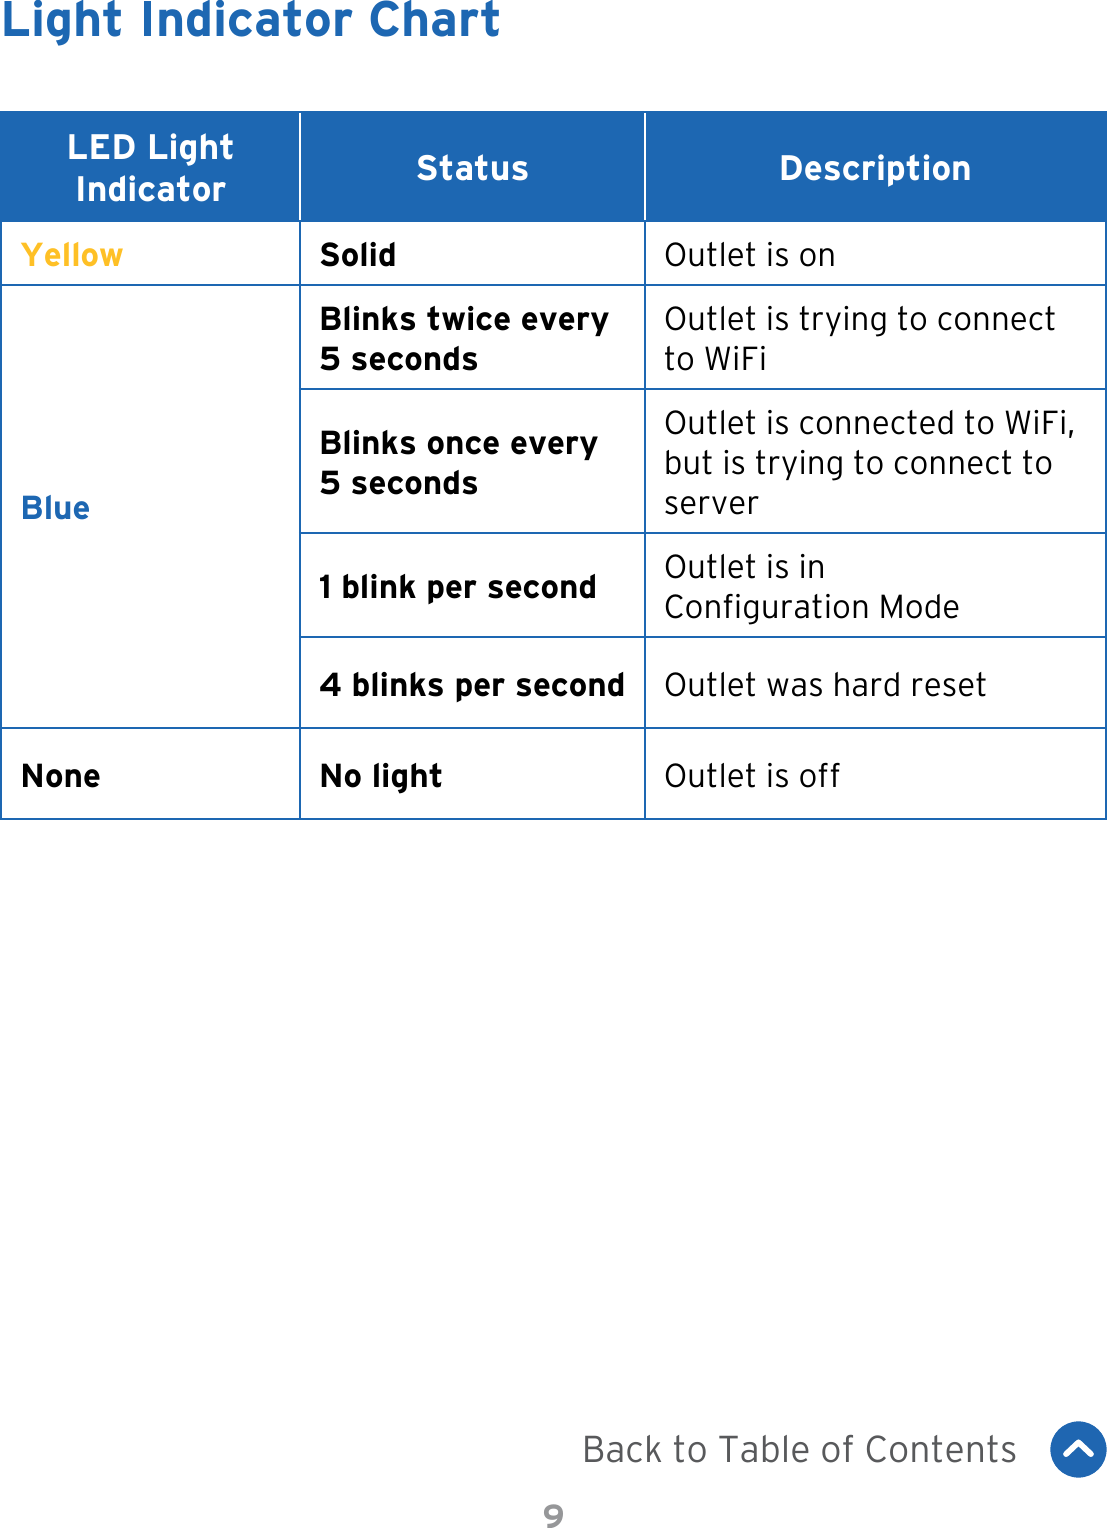 9Light Indicator ChartLED Light Indicator Status DescriptionYellow Solid Outlet is onBlueBlinks twice every 5 secondsOutlet is trying to connect to WiFiBlinks once every 5 secondsOutlet is connected to WiFi, but is trying to connect to server1 blink per second Outlet is in  Conguration Mode4 blinks per second  Outlet was hard resetNone No light Outlet is offBack to Table of Contents